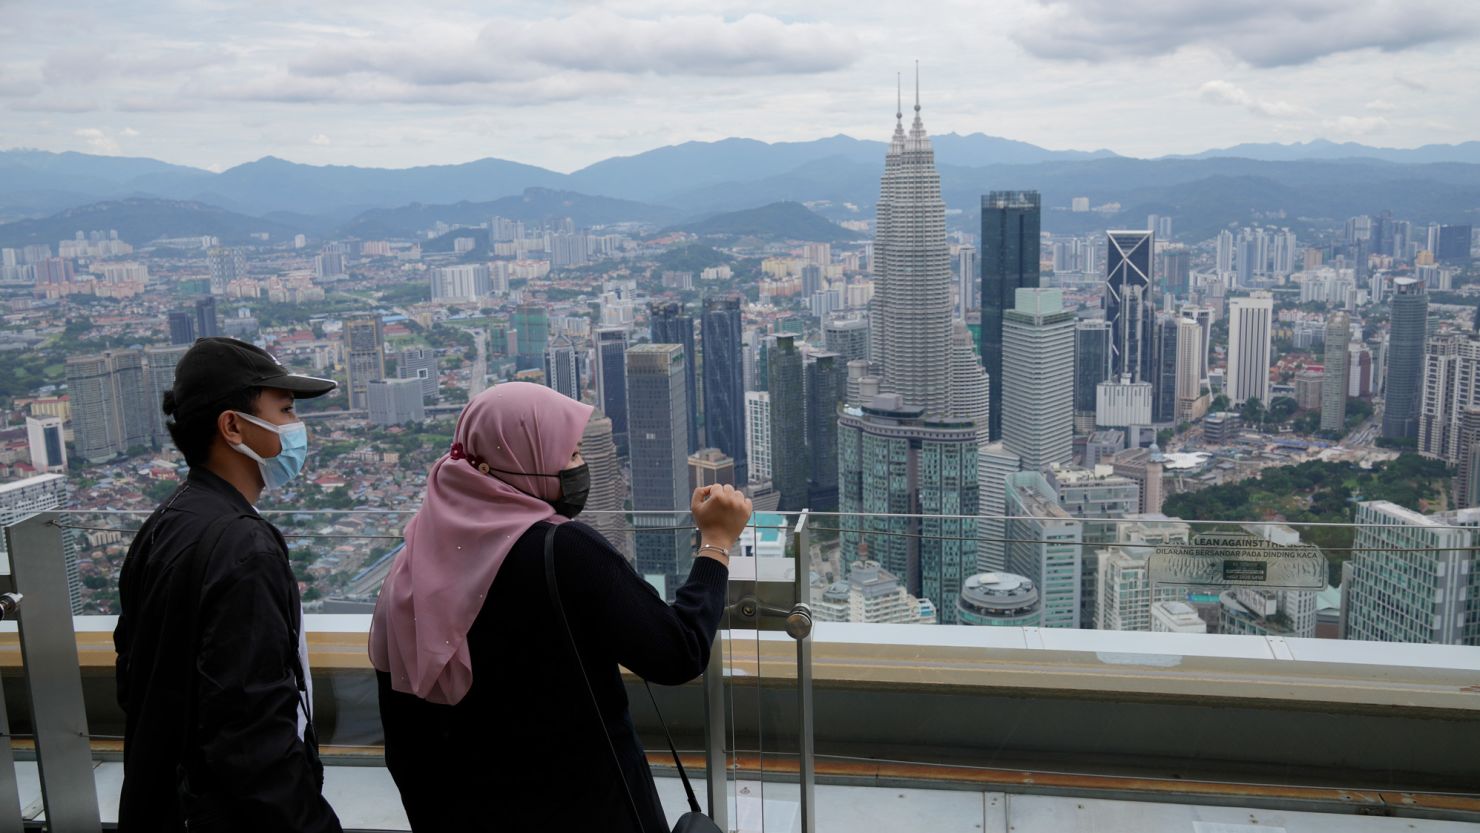 People wearing face masks take in the view from an observation deck at the Kuala Lumpur Tower in Malaysia on October 1.